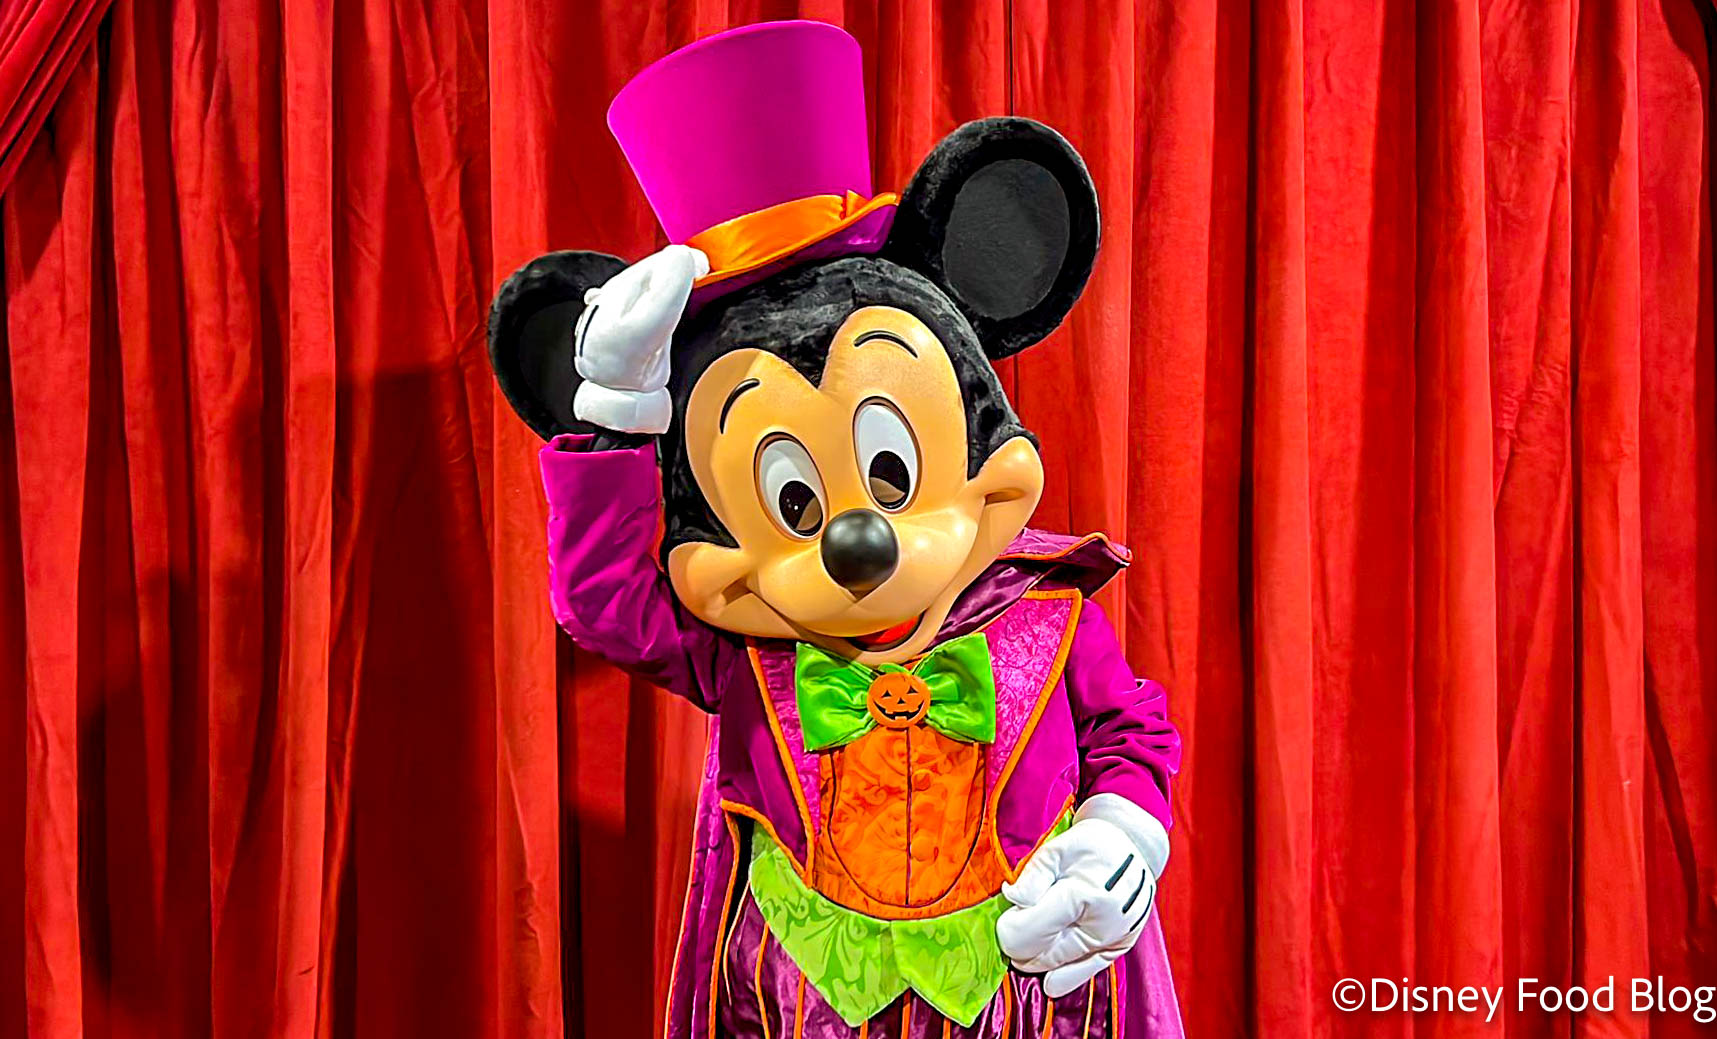 Sorcerer Mickey costume for Halloween!  Mickey costume, Mickey mouse,  Mickey mouse costume